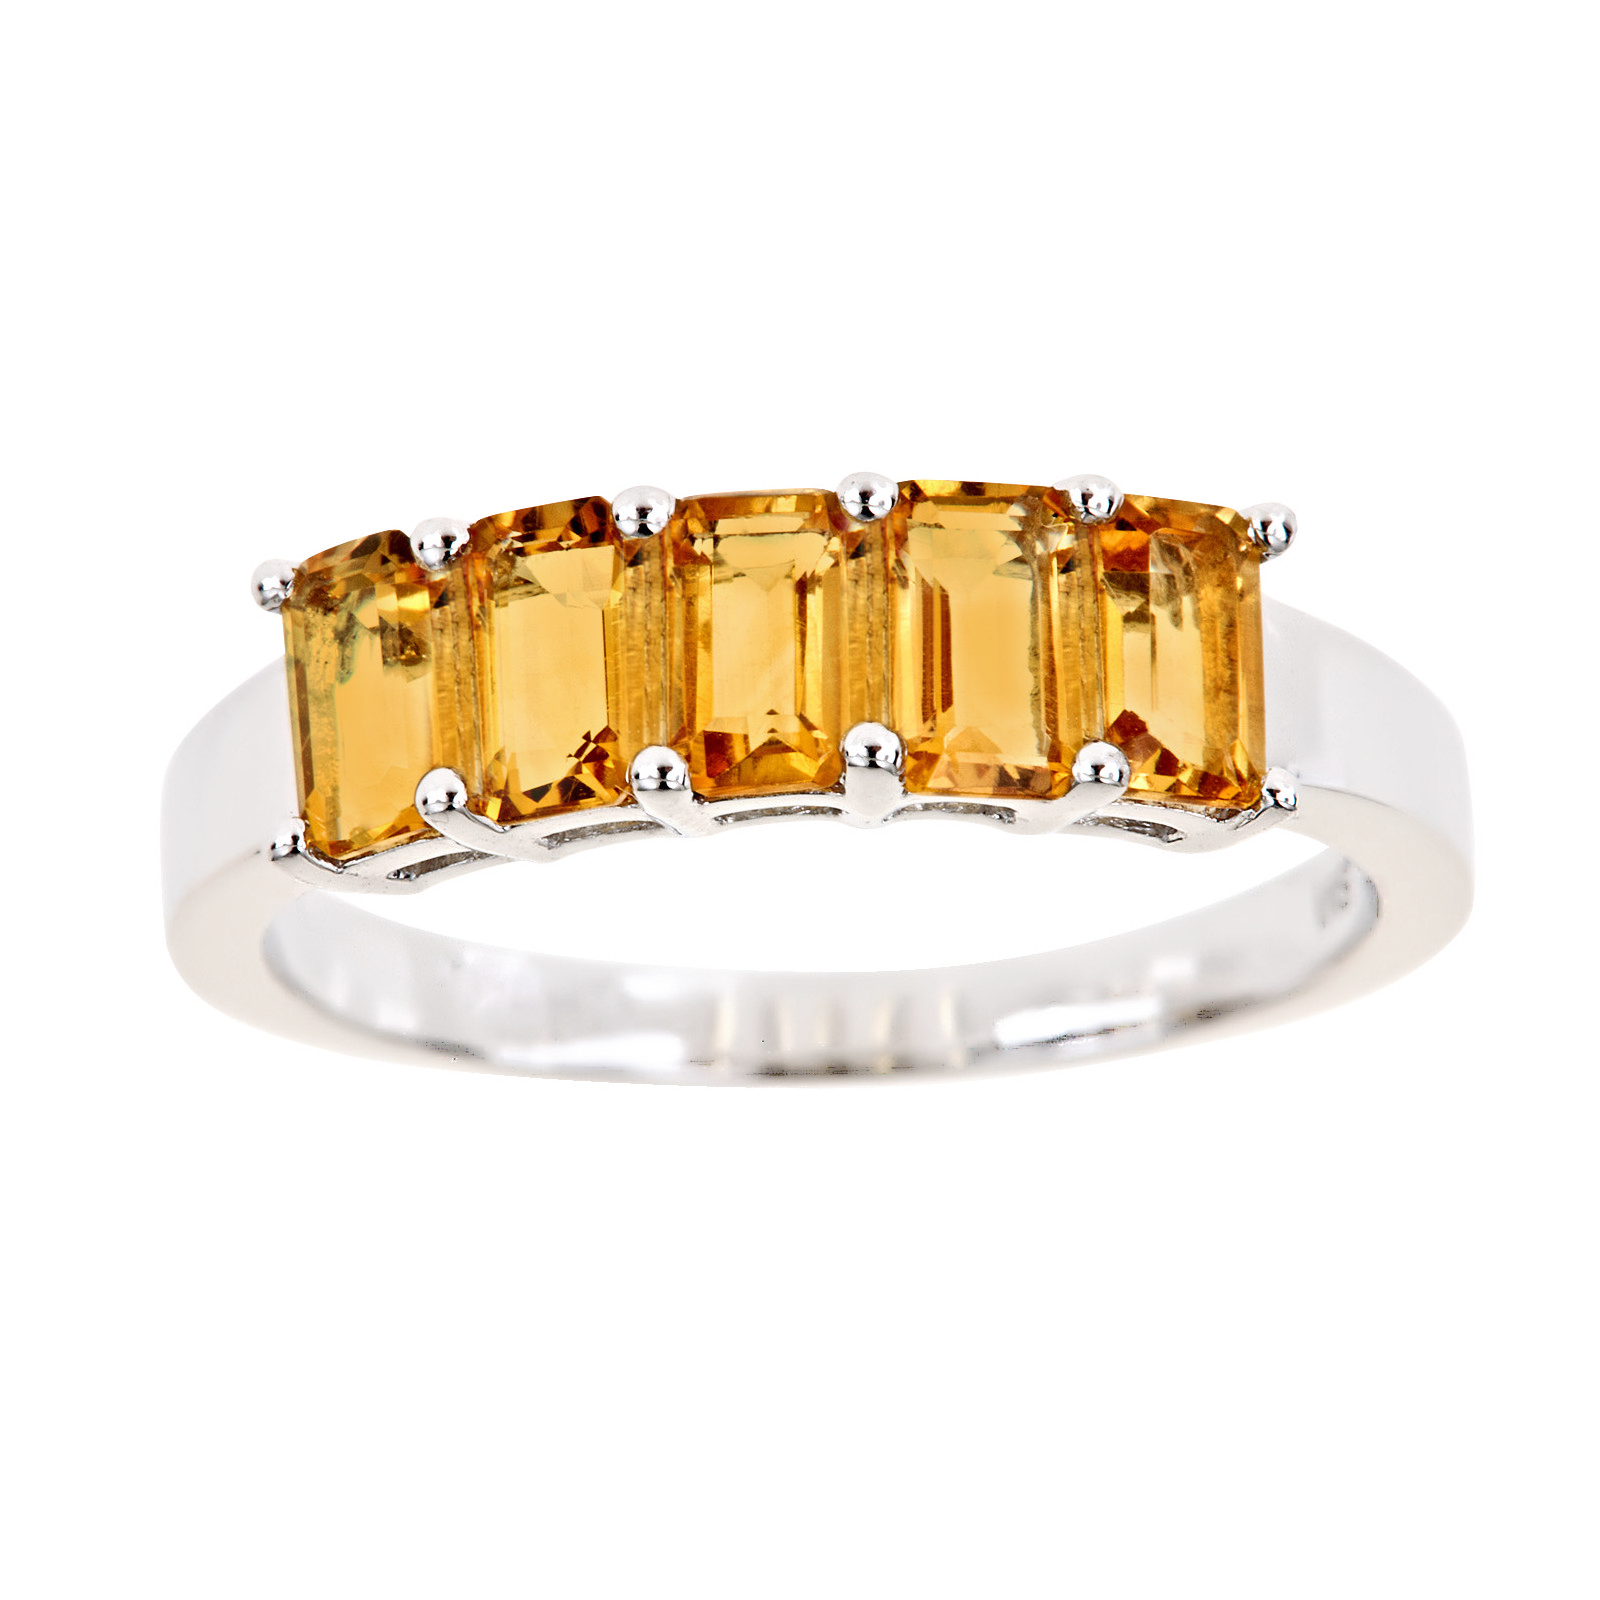 Ladies Sterling Silver 5 Stone  Emerald Cut Citrine Ring